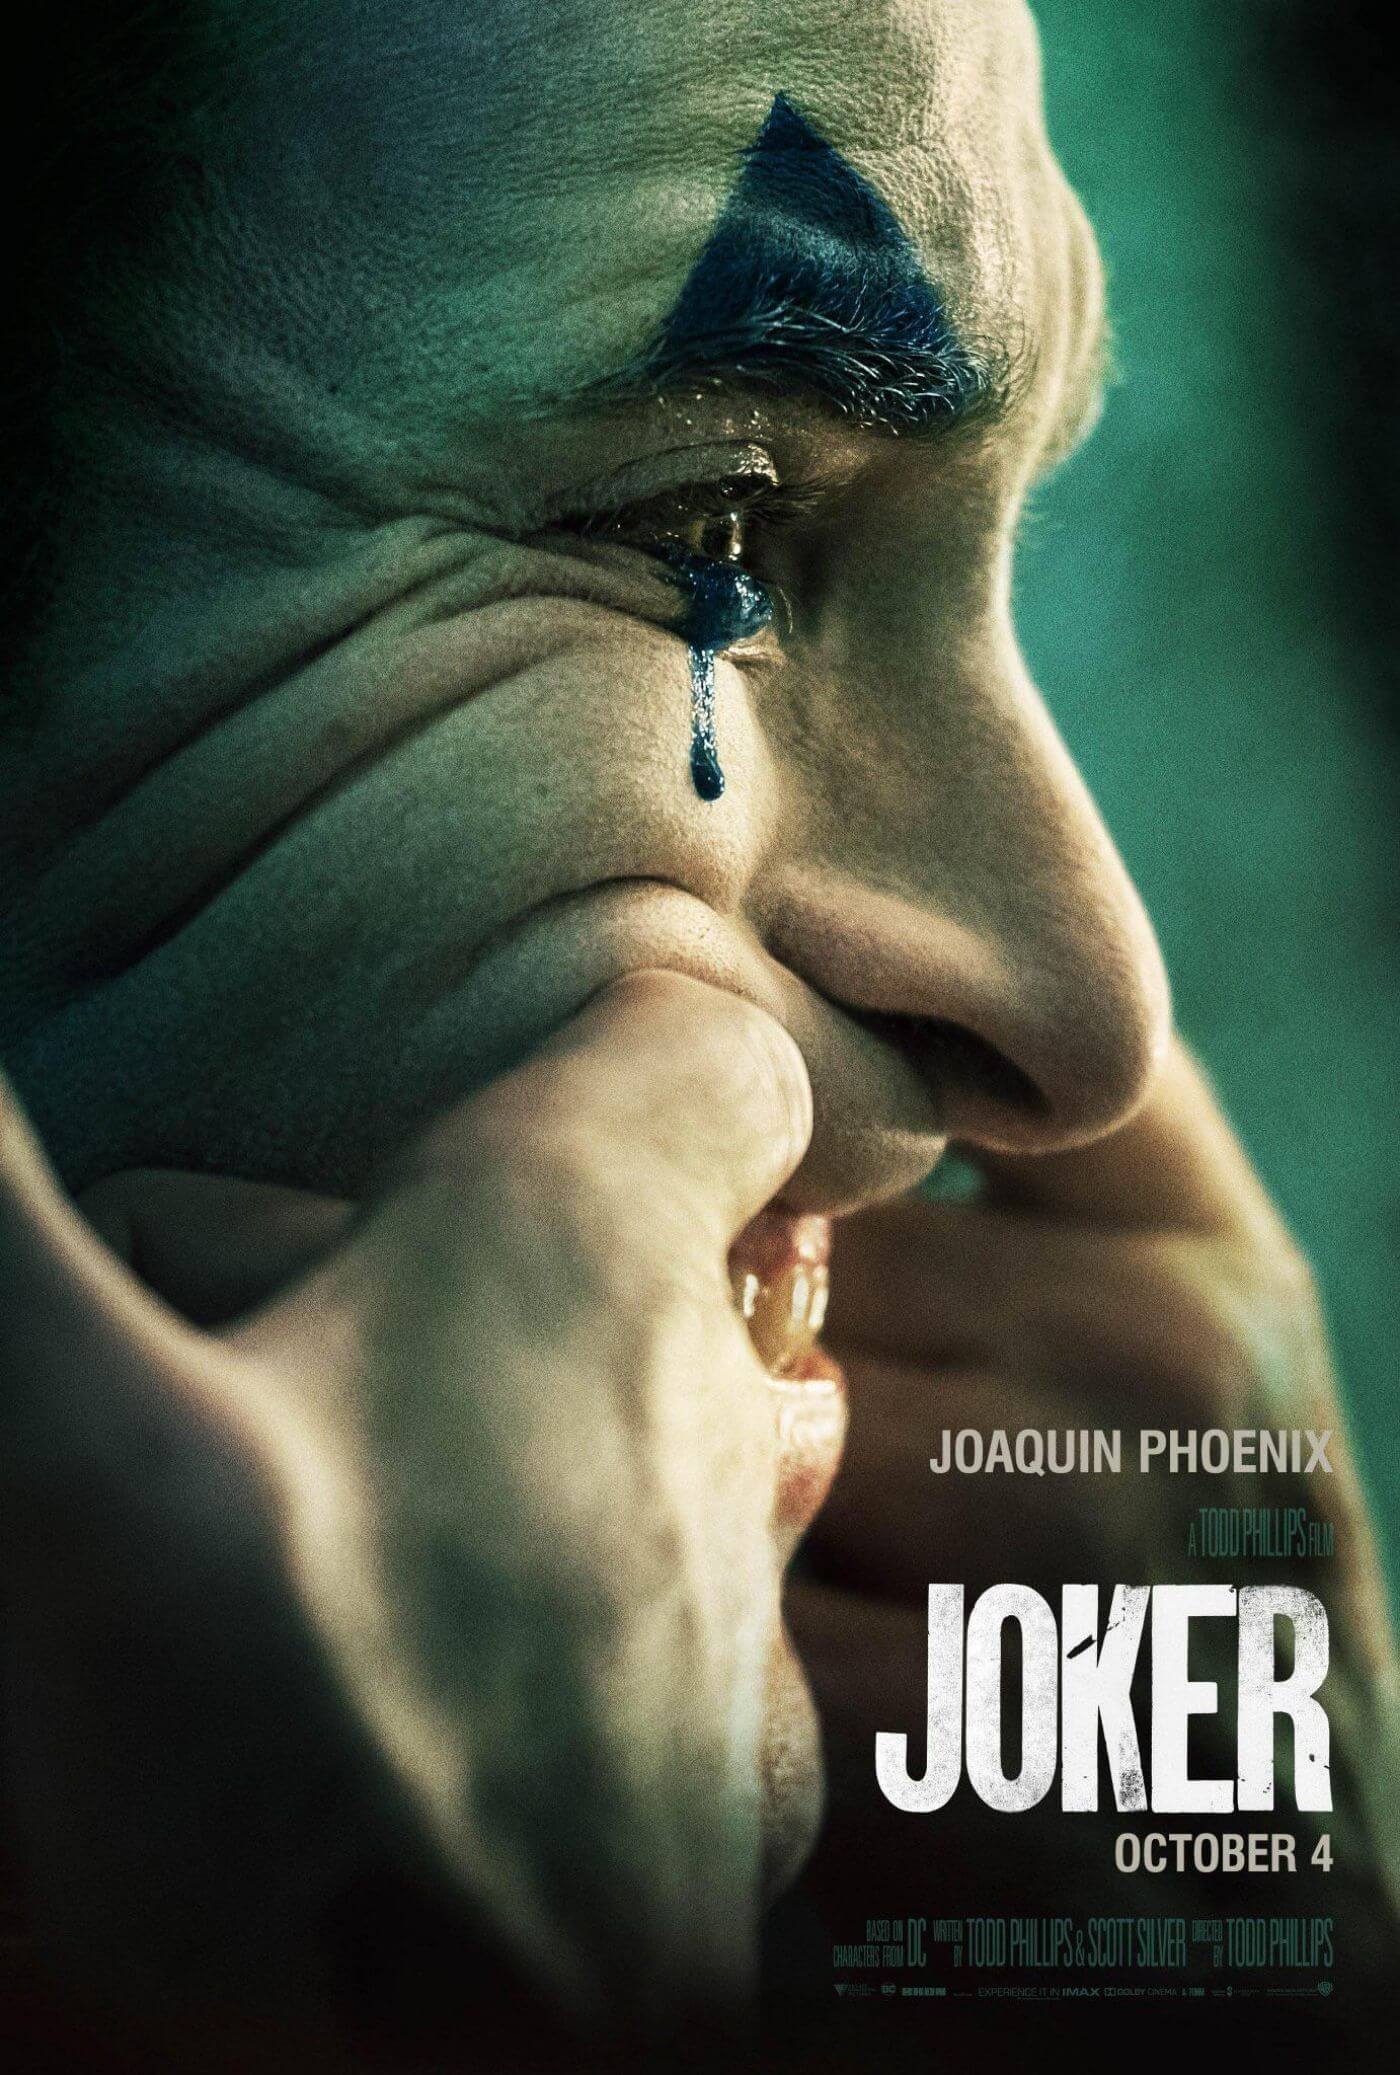 Mangler respons nødsituation Joker - Joaquin Phoenix - Hollywood Action Movie Poster 3 by Joel Jerry |  Buy Posters, Frames, Canvas & Digital Art Prints | Small, Compact, Medium  and Large Variants